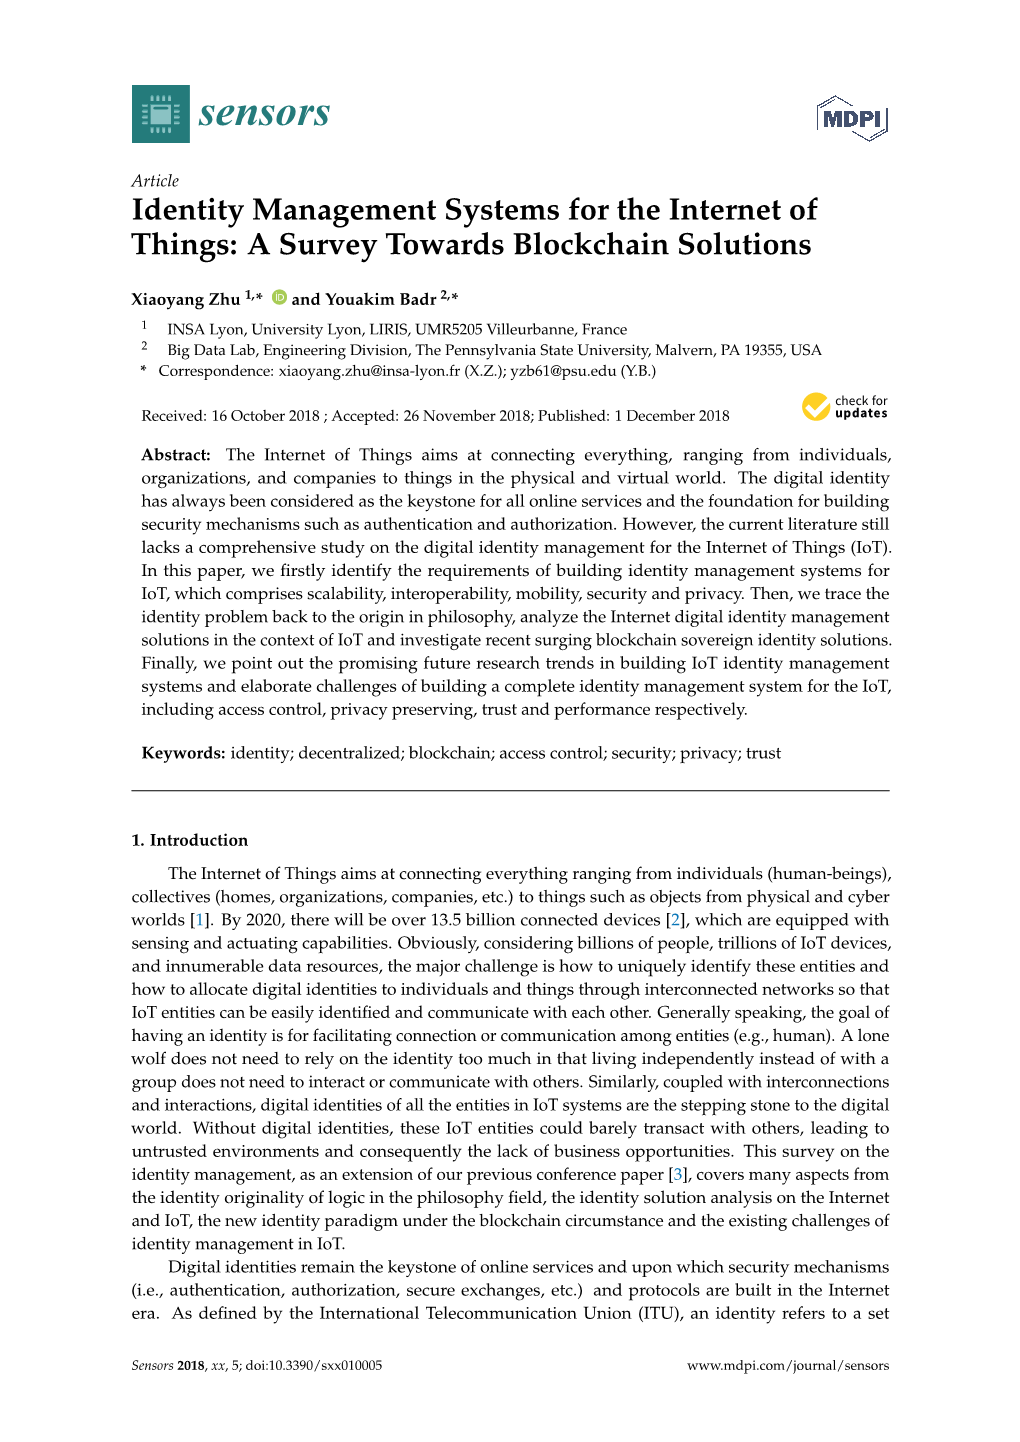 Identity Management Systems for the Internet of Things: a Survey Towards Blockchain Solutions